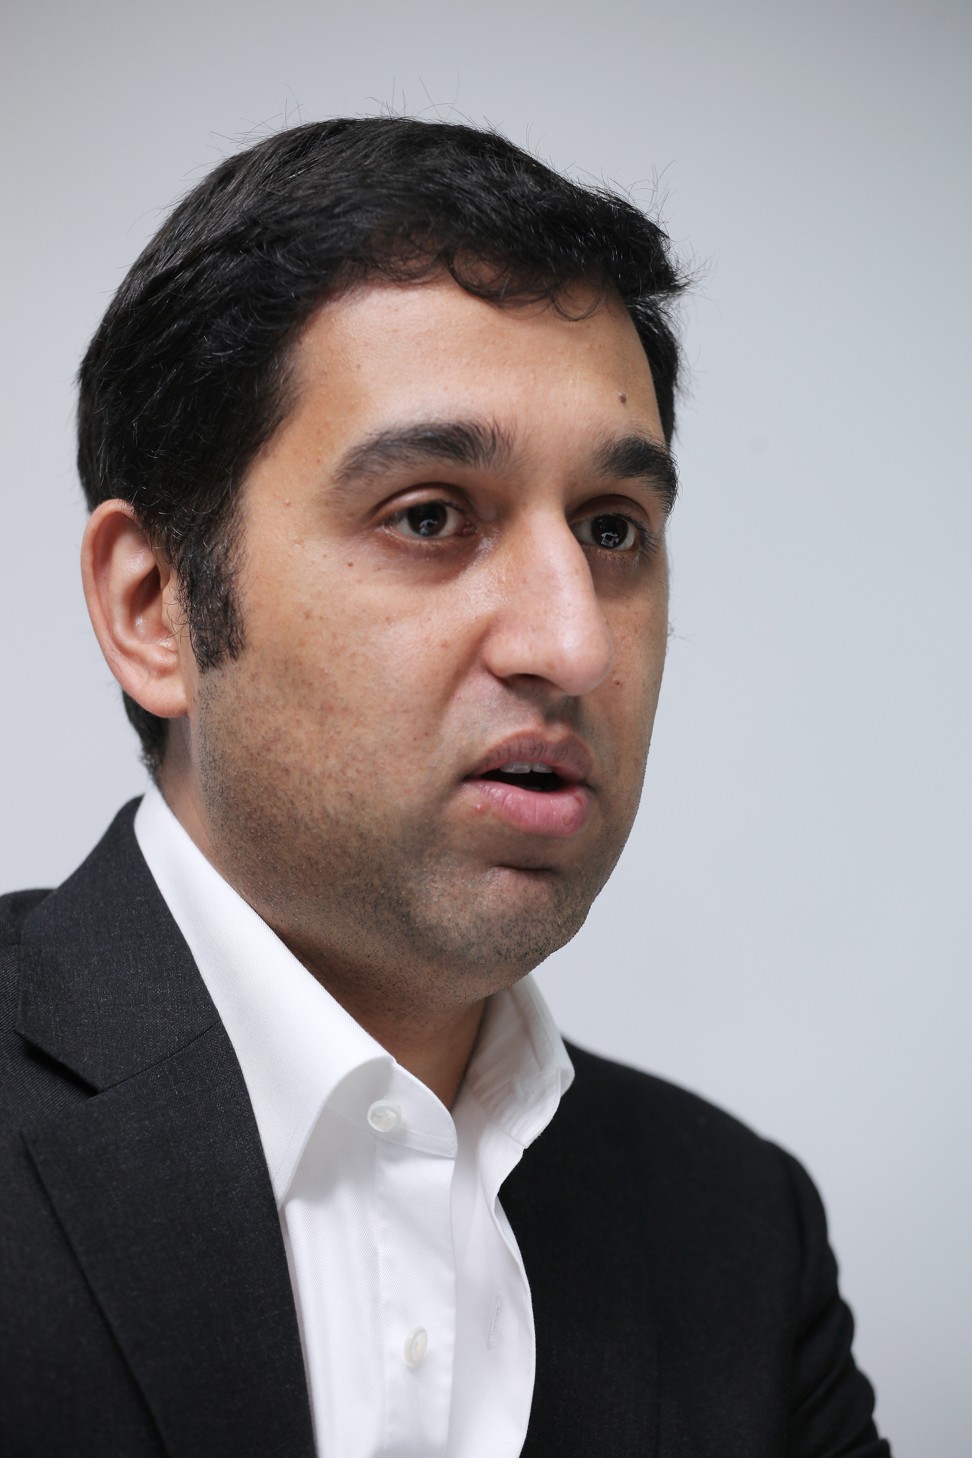 Mikaal Abdulla, co-founder and CEO of Hong Kong-based financial technology company 8 Securities. Photo: Paul Yeung